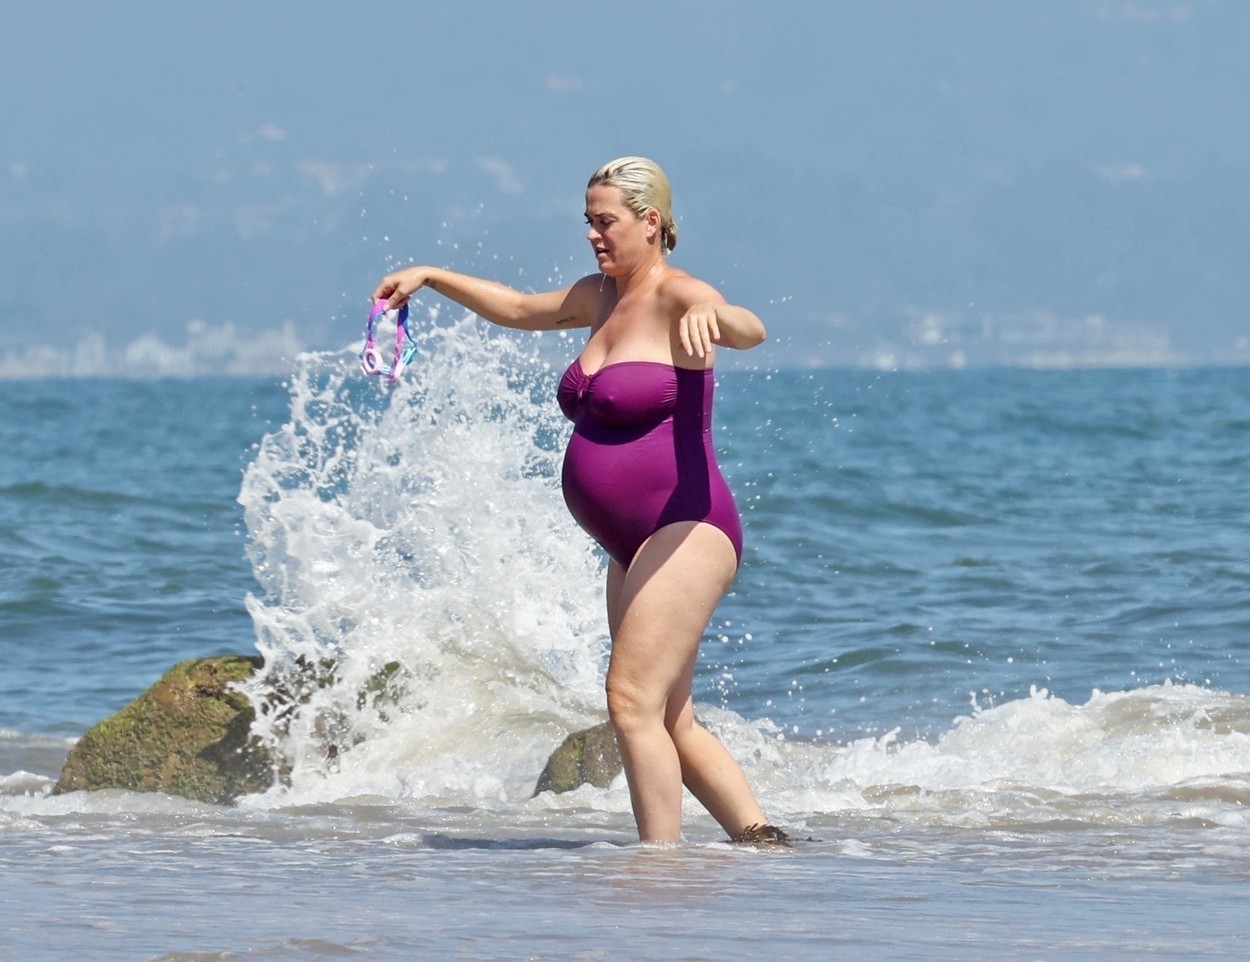 Malibu, CA  - *PREMIUM-EXCLUSIVE*  - *WEB EMBARGO UNTIL 9 AM PDT ON JULY 14, 2020* The Roar singer who’s expecting her first child in August, waded in to cool off in the ocean with her pregnant friend as temperatures soared in Southern California.

*UK Clients - Pictures Containing Children
Please Pixelate Face Prior To Publication*,Image: 542496587, License: Rights-managed, Restrictions: RIGHTS: WORLDWIDE EXCEPT IN UNITED KINGDOM, Model Release: no, Credit line: Clint Brewer Photography / BACKGRID / Backgrid USA / Profimedia